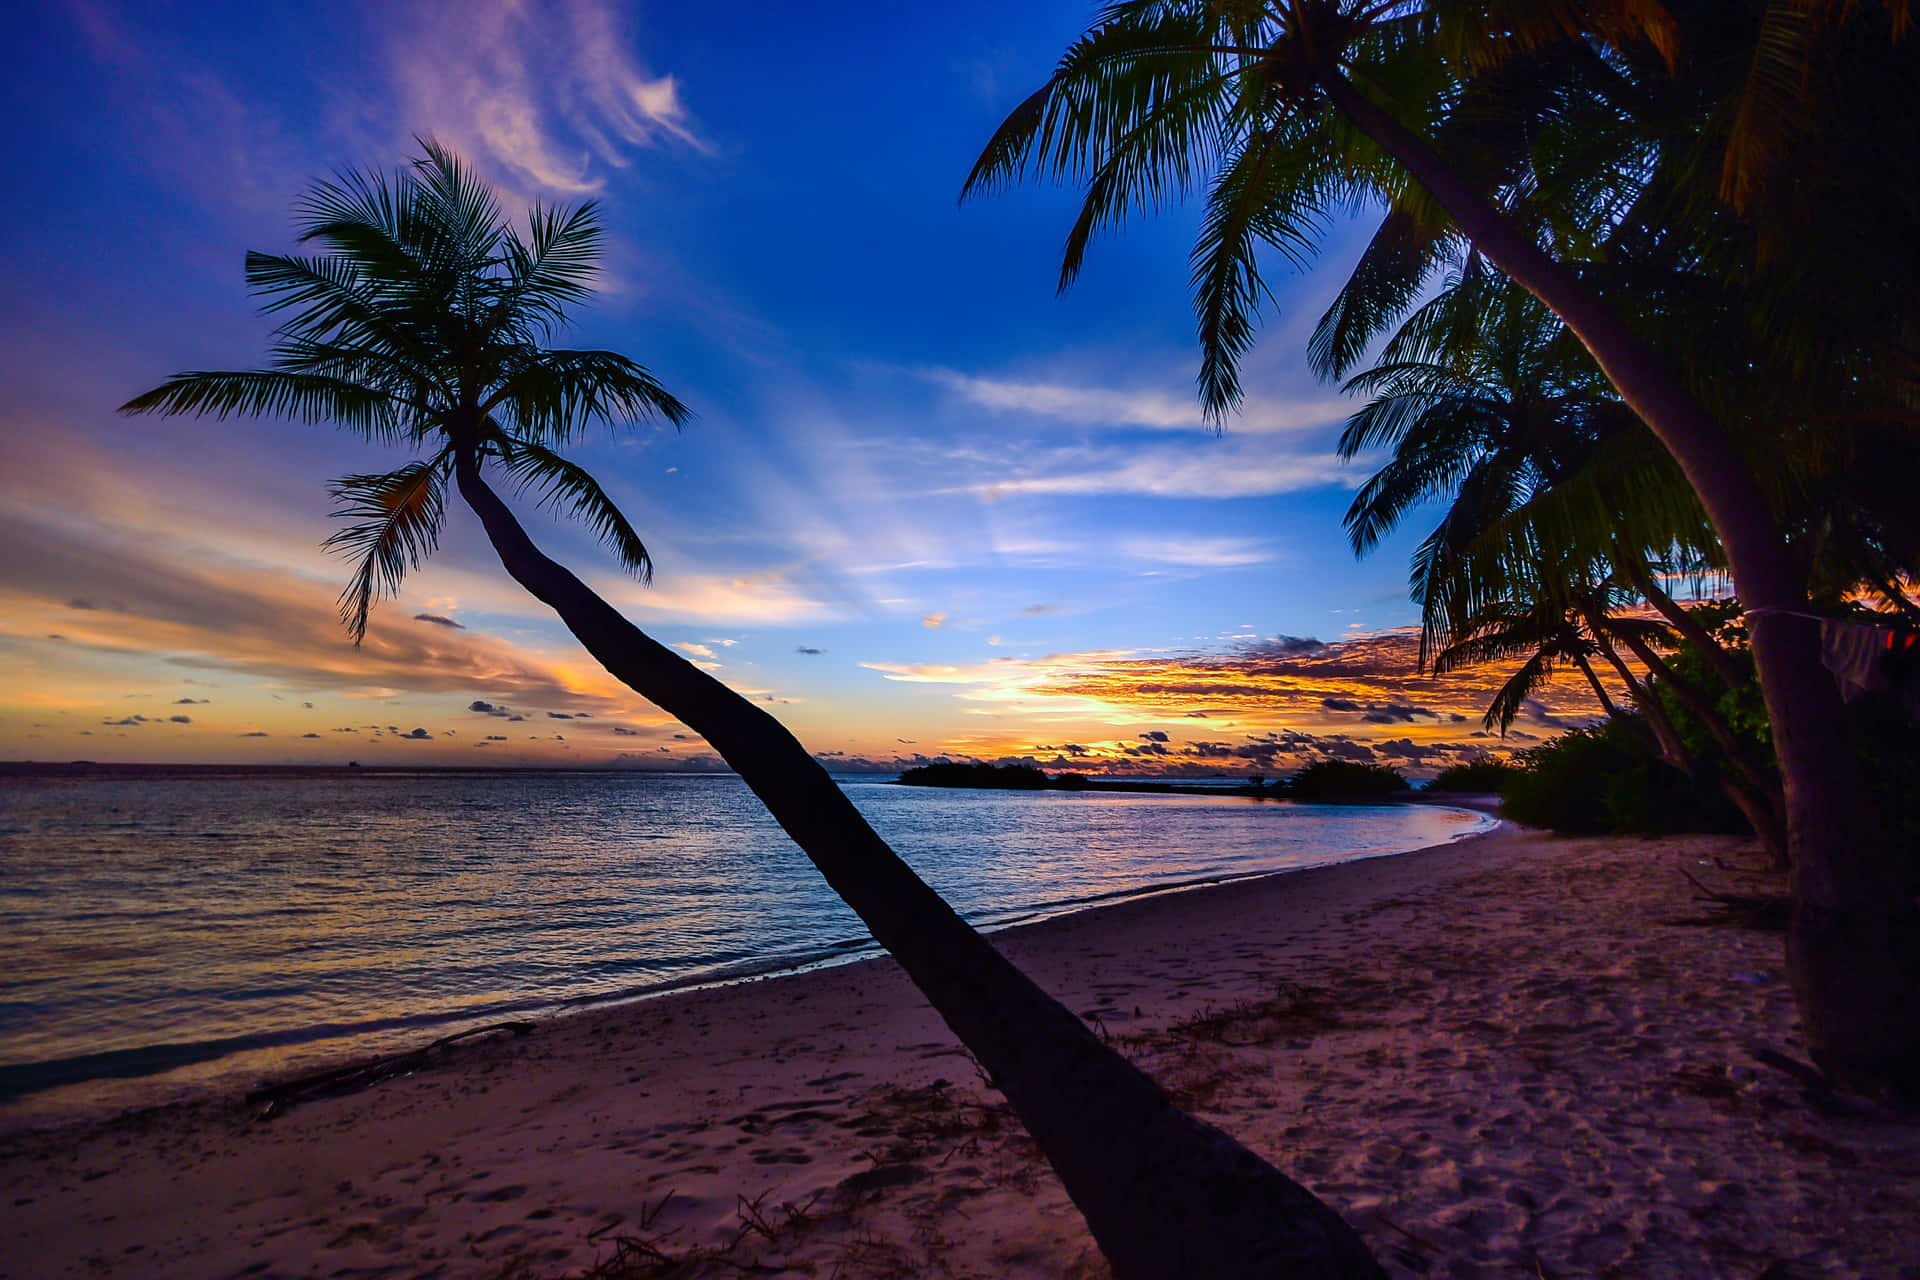 Feel the calm of the ocean in this beautiful beach sunset. Wallpaper